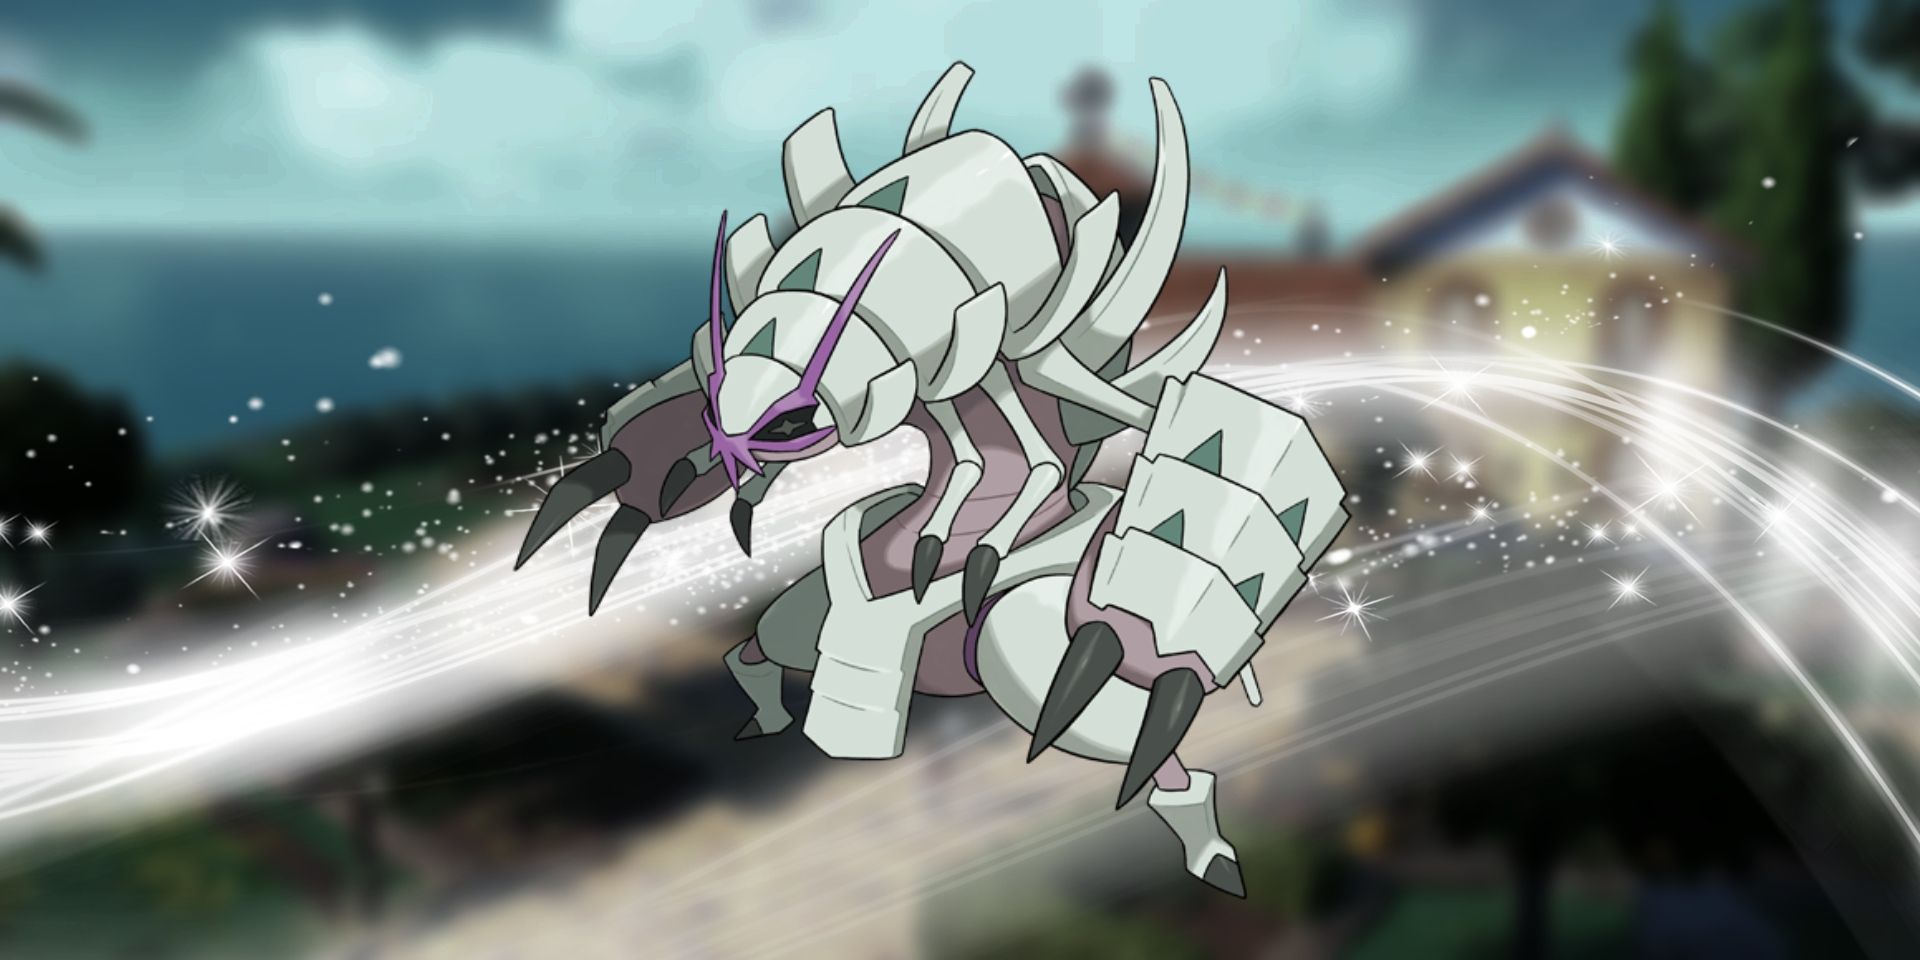 Pokemon's Golisopod in the middle. Behind it is a white flowing and sparkling effect.